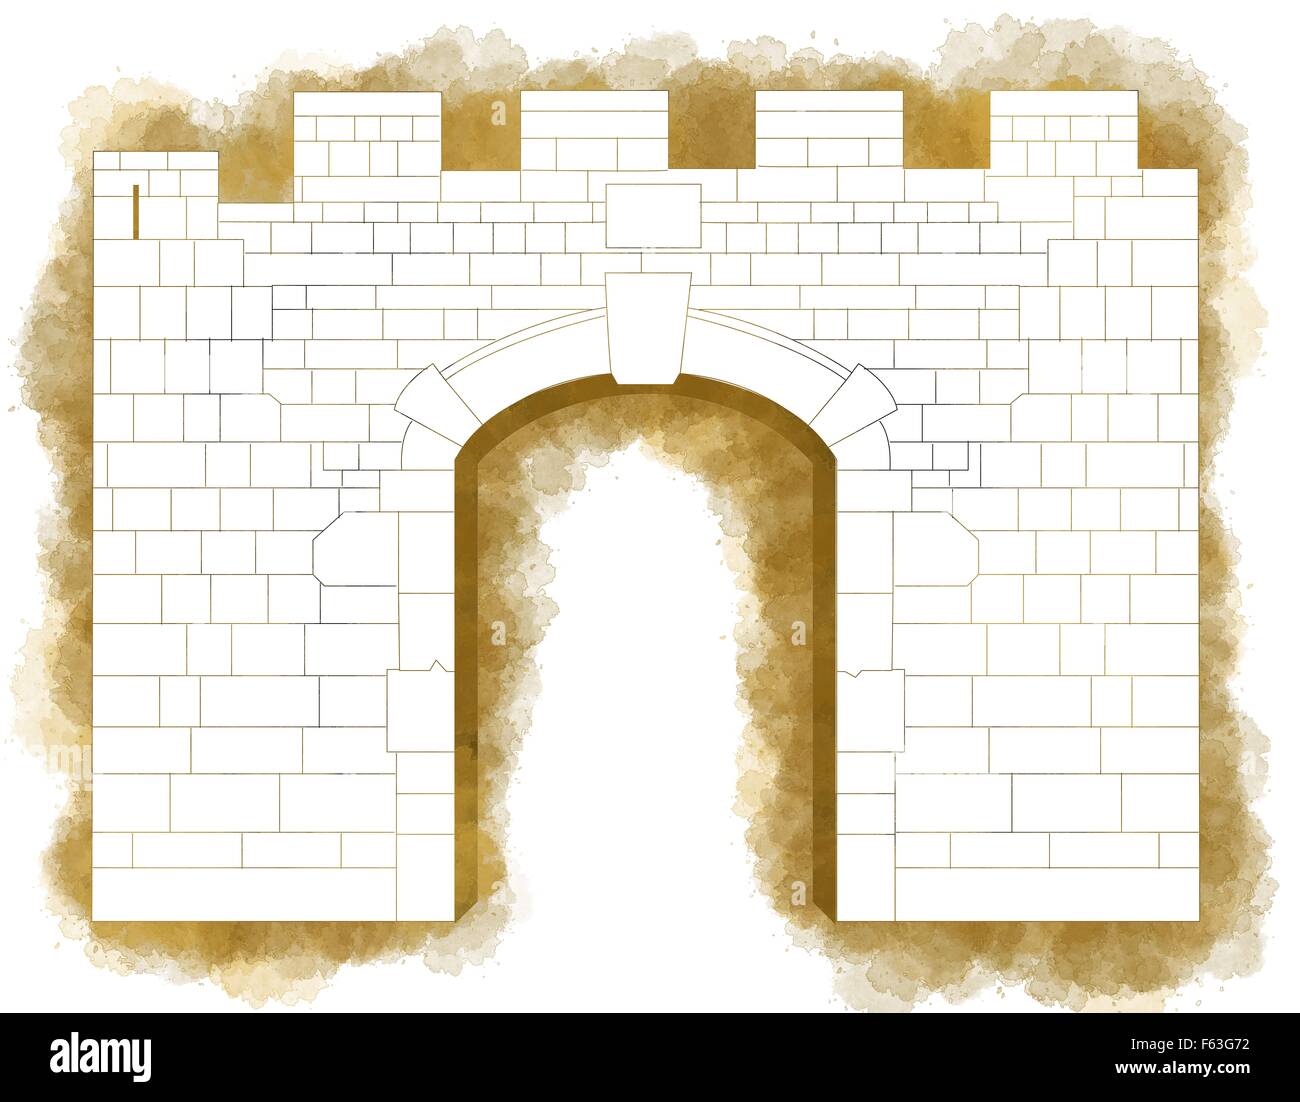 Illustration of New Gate, one of eight gates in the walls of the Old City of Jerusalem, Israel Stock Photo